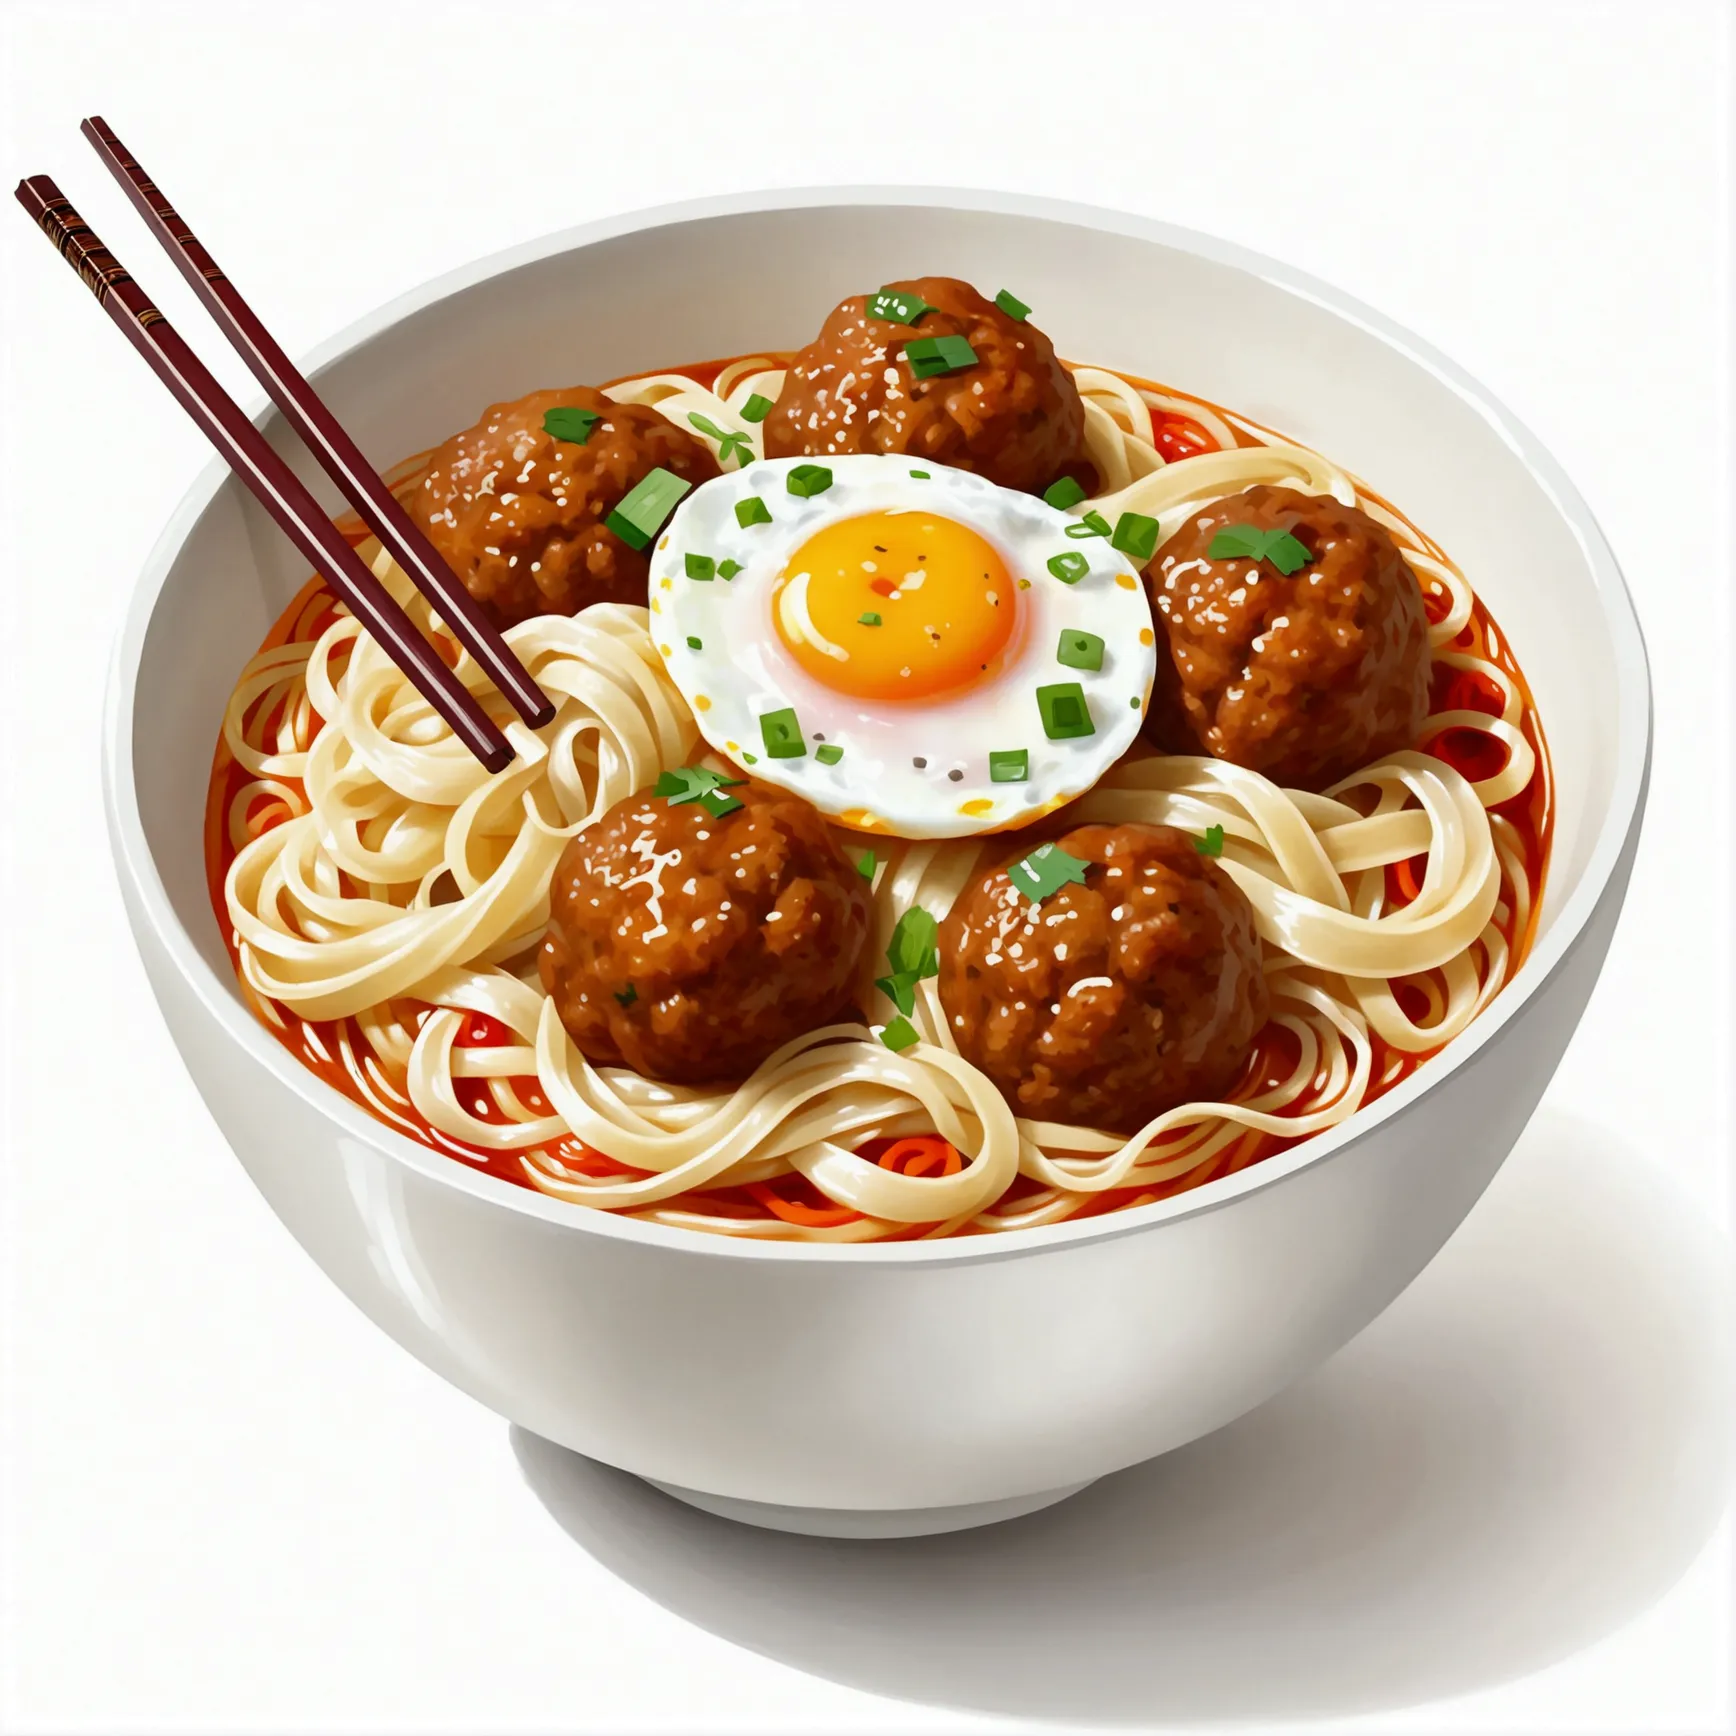 there is a huge extremely delicious bowl of noodle with meatballs and egg, chopstick, illustration, isolated with solid white ba...